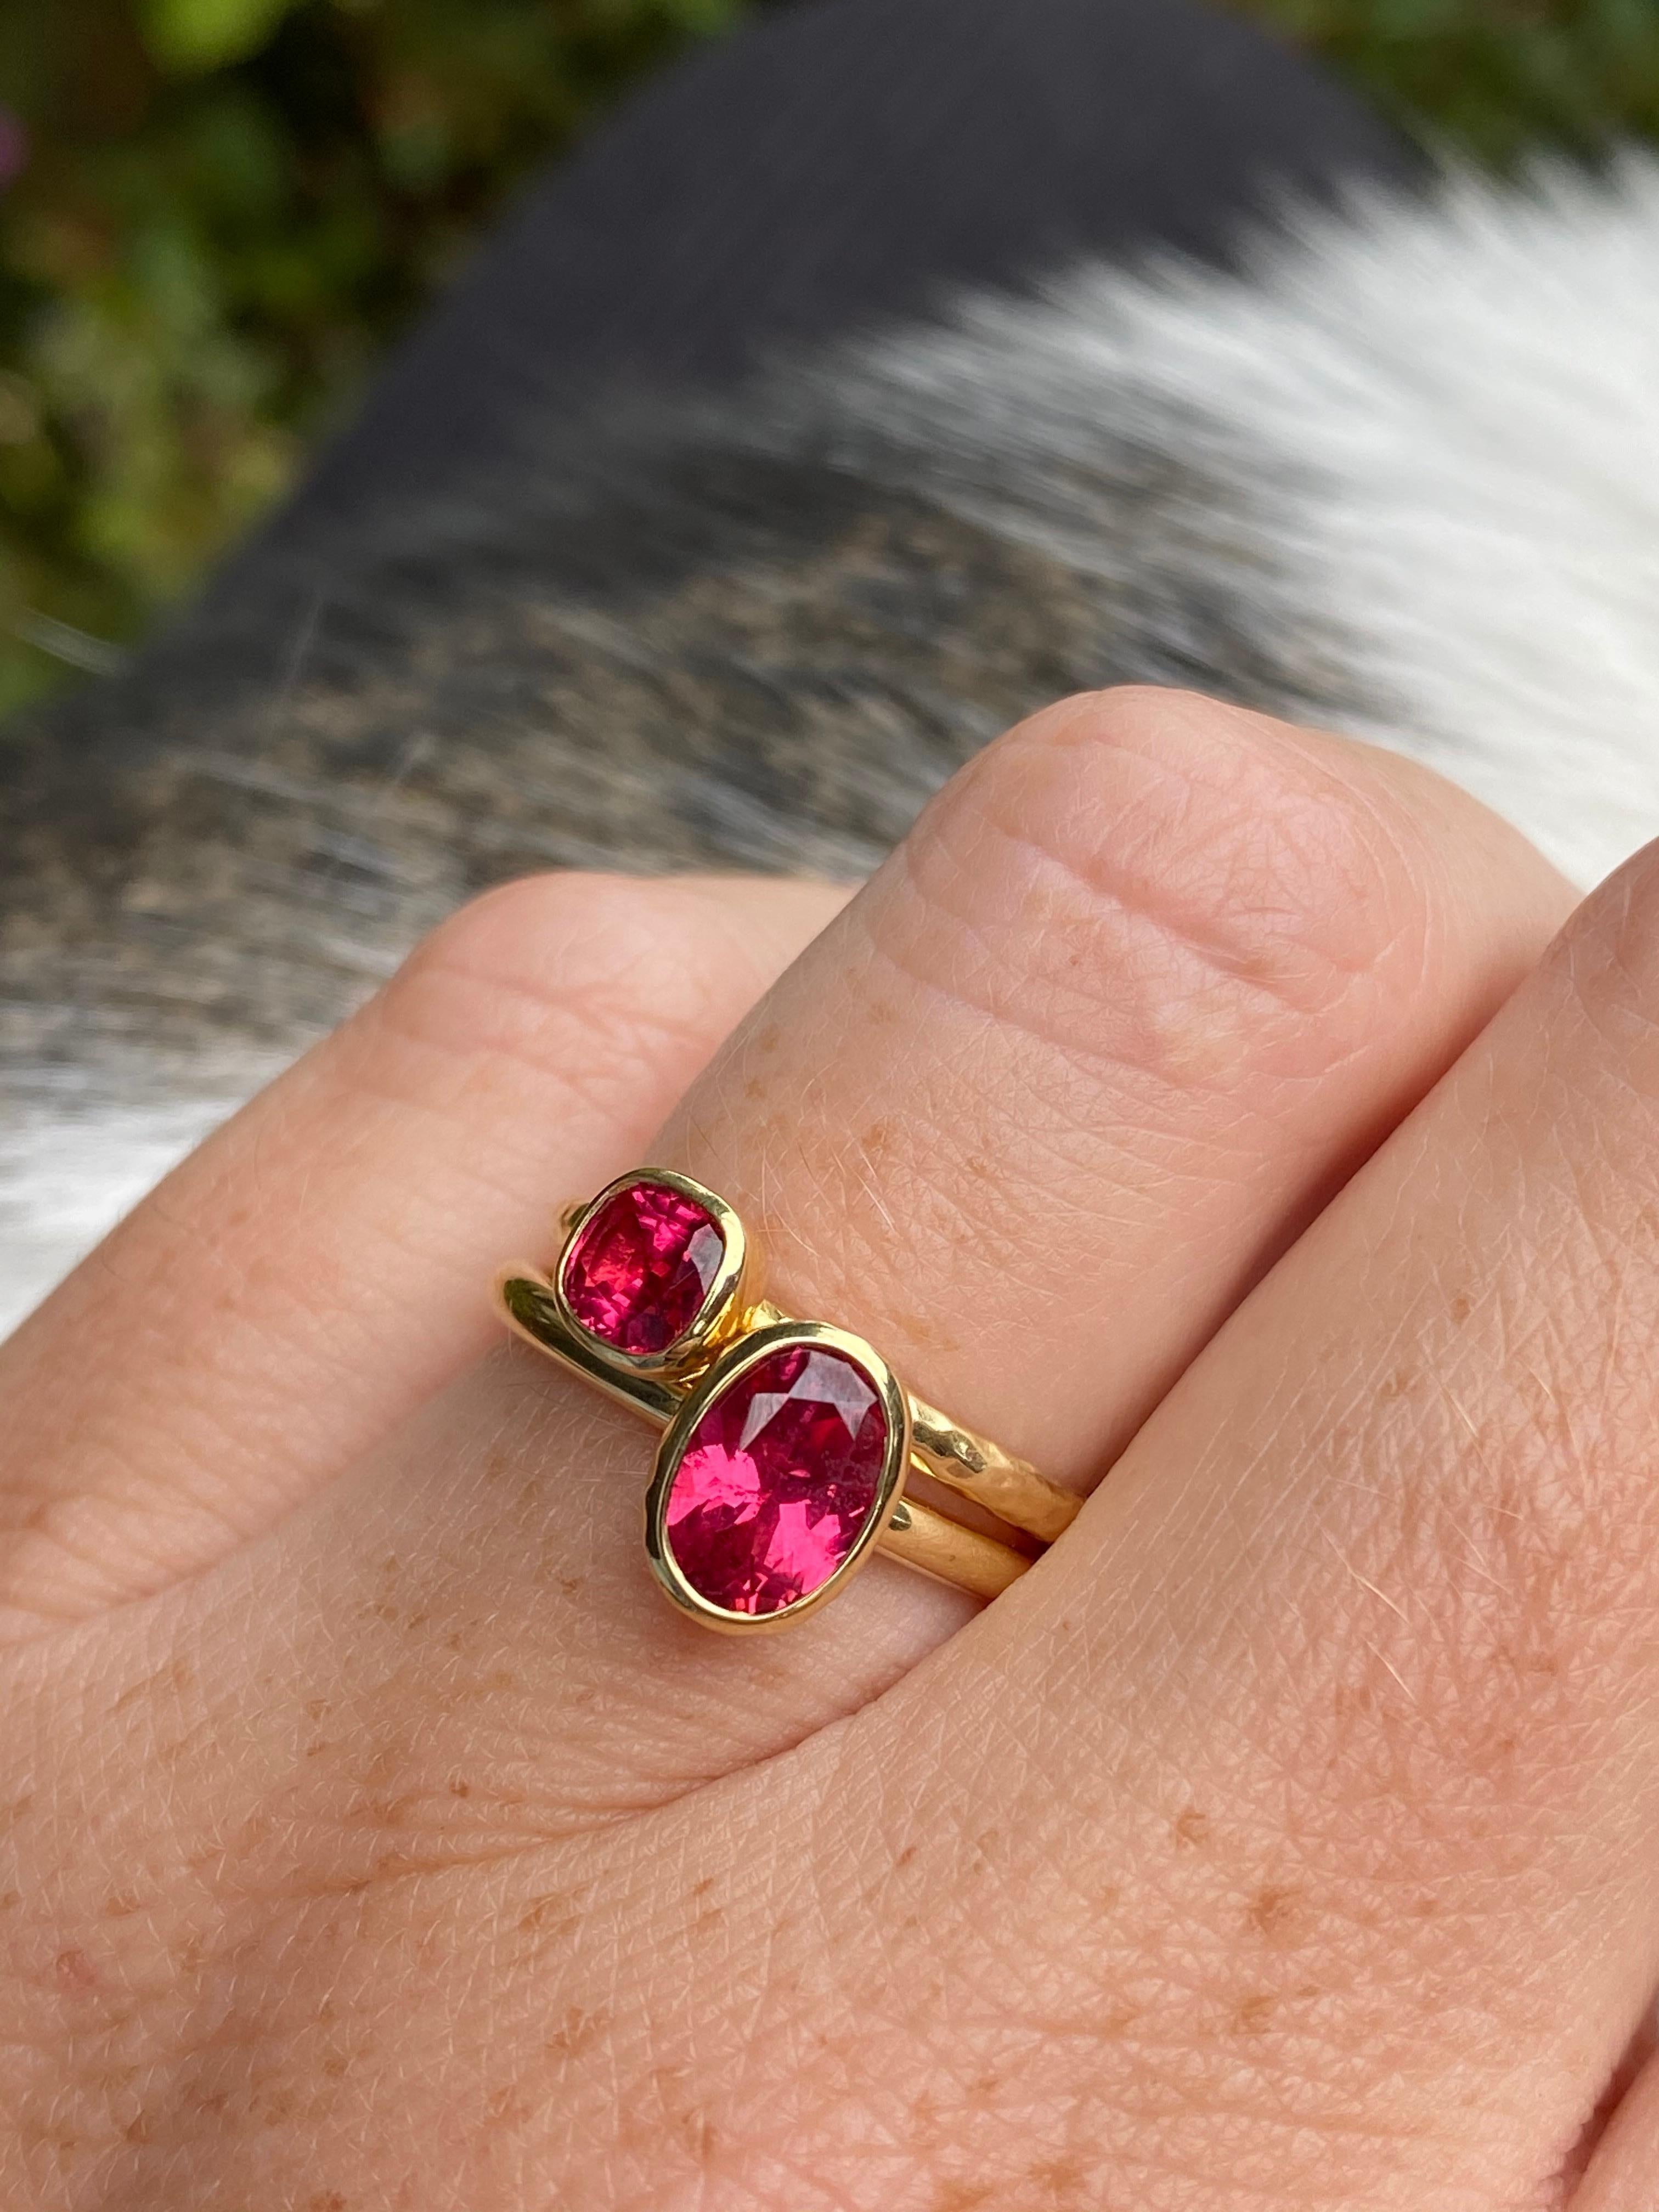 There is a spectacular concentration of color in this 0.56 carat Tanzanian spinel. This natural gem is devoid of any treatment. Hand forged in 18 karat gold by our master goldsmith. Hand hammered shank, polished bezel.

-Size 7.25 (can be sized)
-18